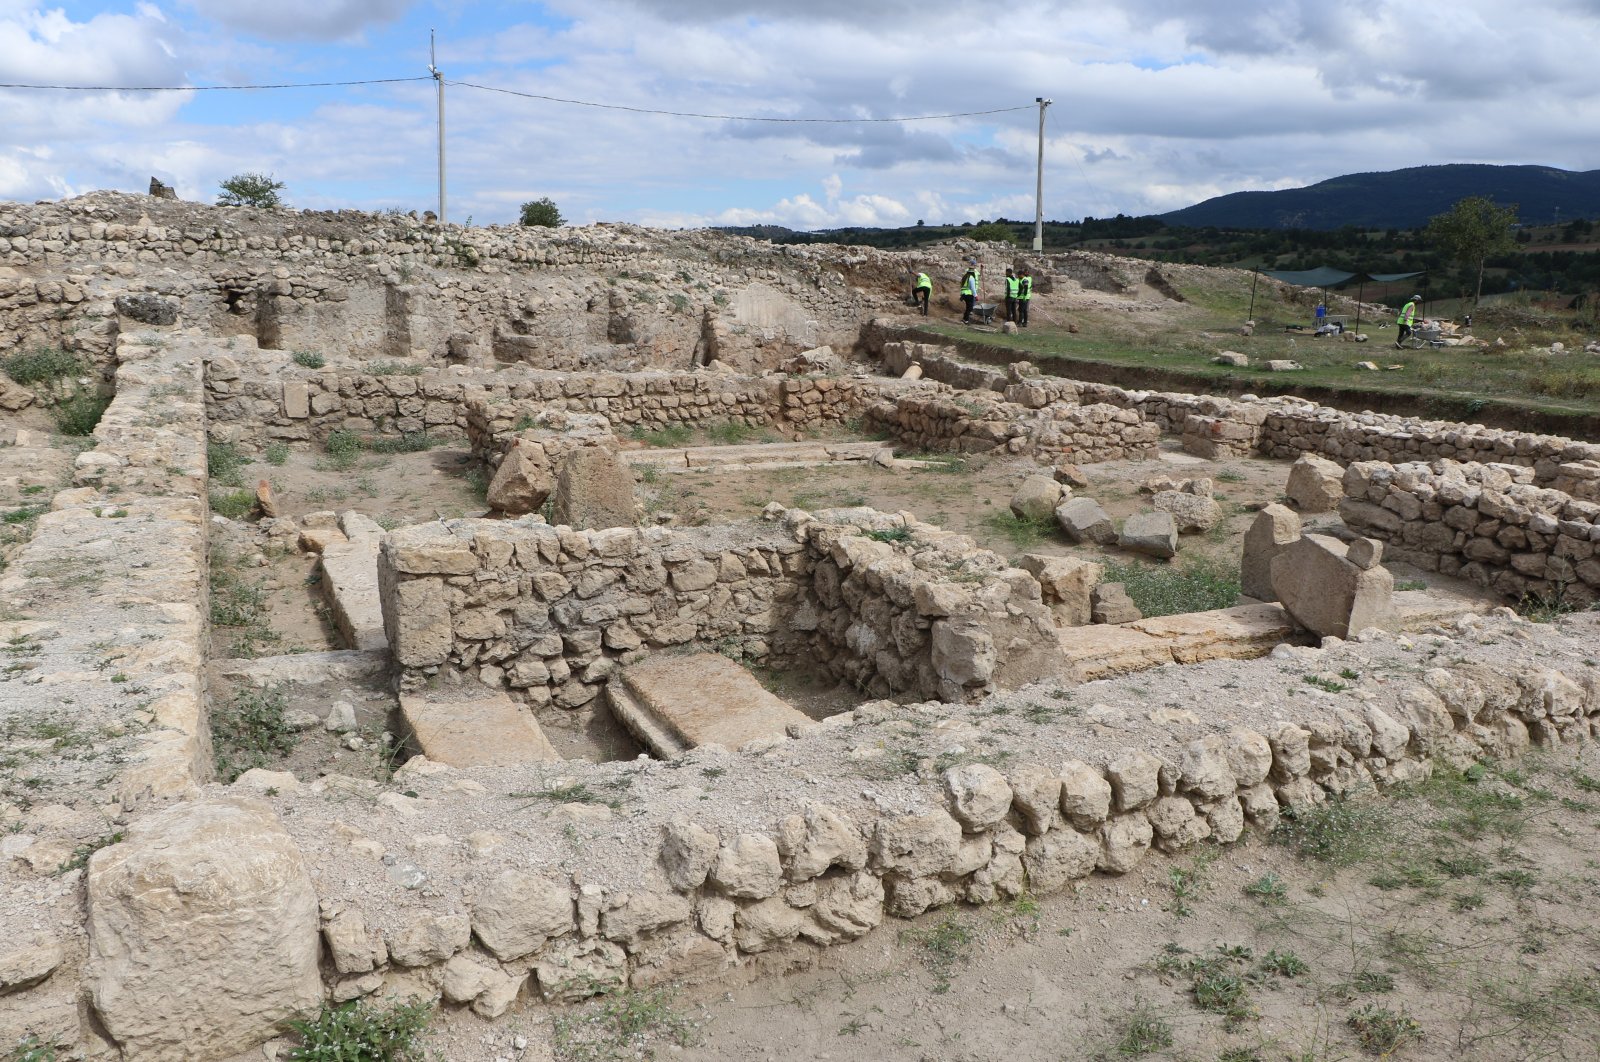 Traces of the Asclepius cult were found during the studies carried out in the ancient city of Hadrianopolis ancient city, believed to have been used as a settlement until the eighth century A.D., Karabük, Türkiye, Sept. 5, 2022. (IHA Photo)